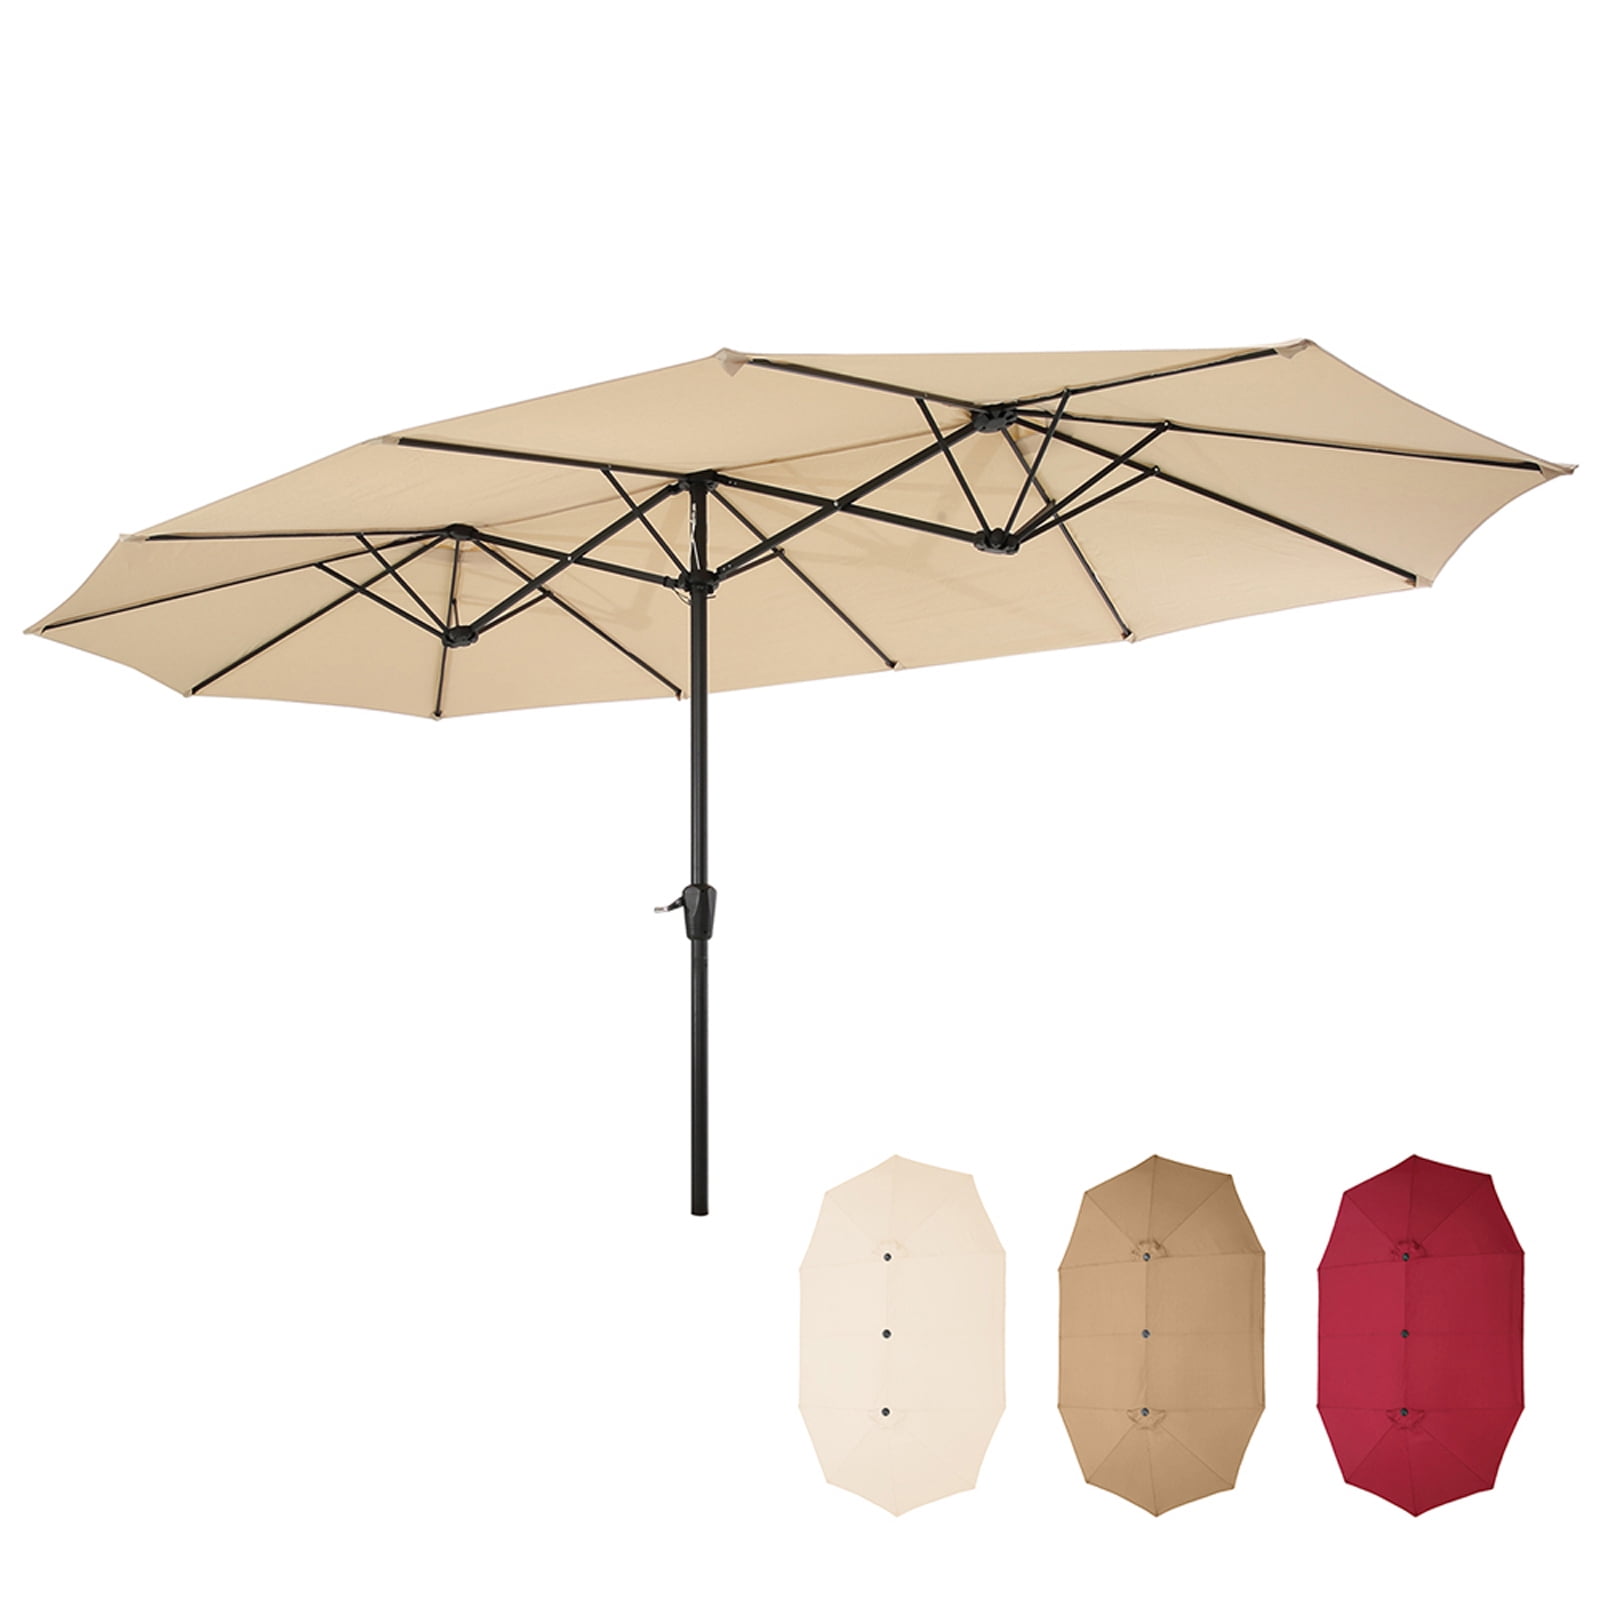 Details about   15x9ft Large Double-Sided Rectangular Outdoor Steel Twin Patio Market Umbrella 